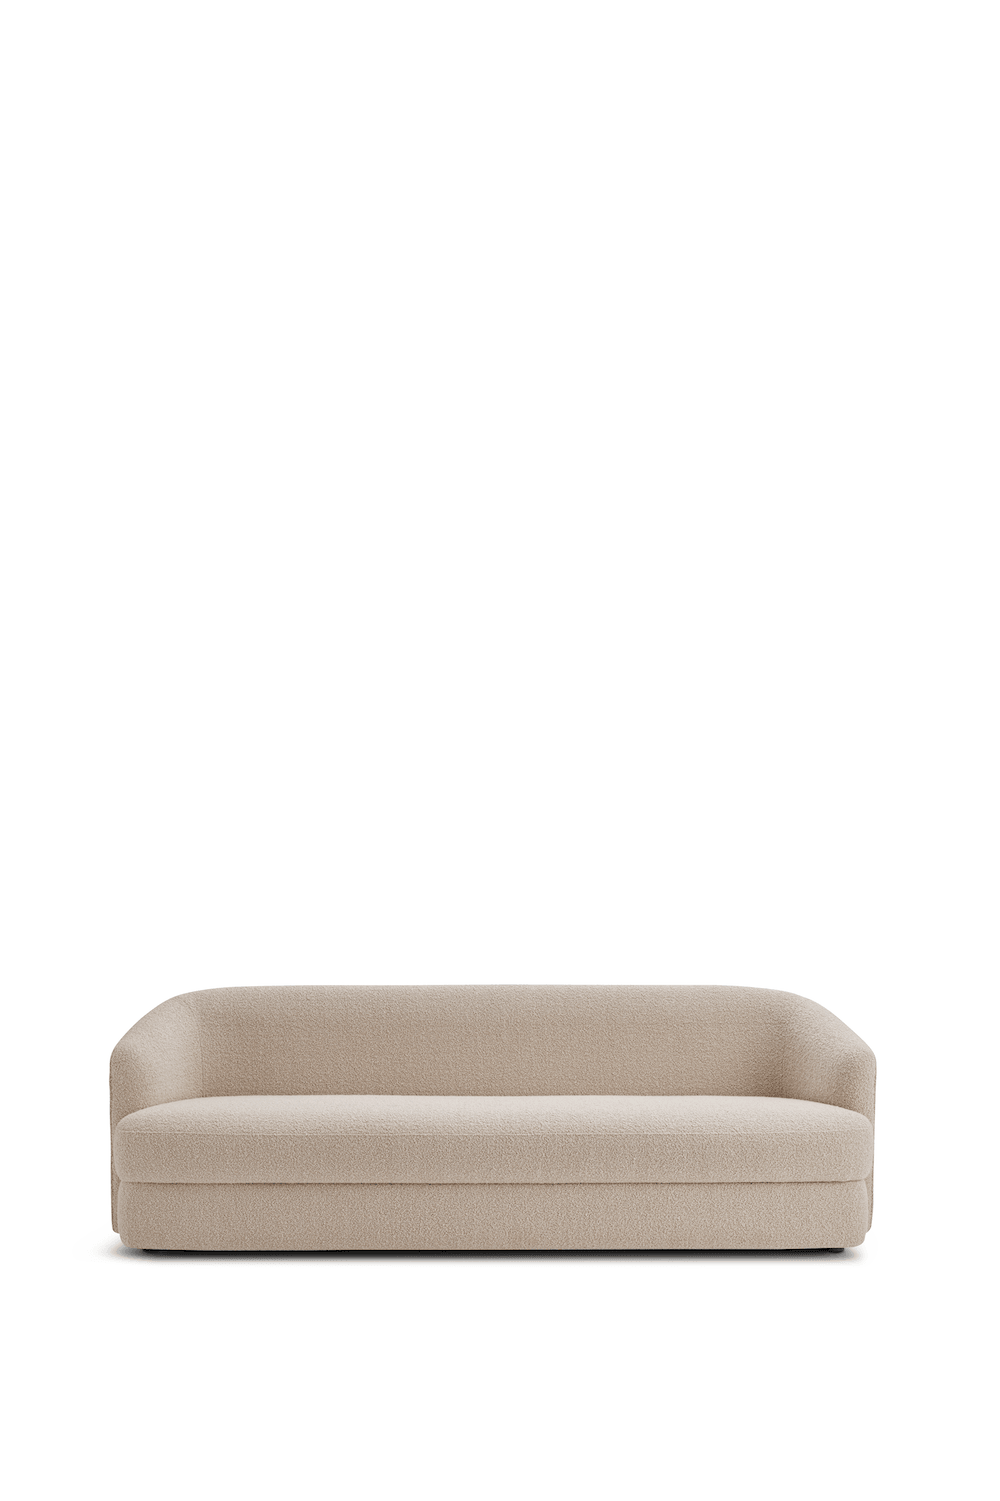 Covent Sofa Deep | 3-seater - The Design Part